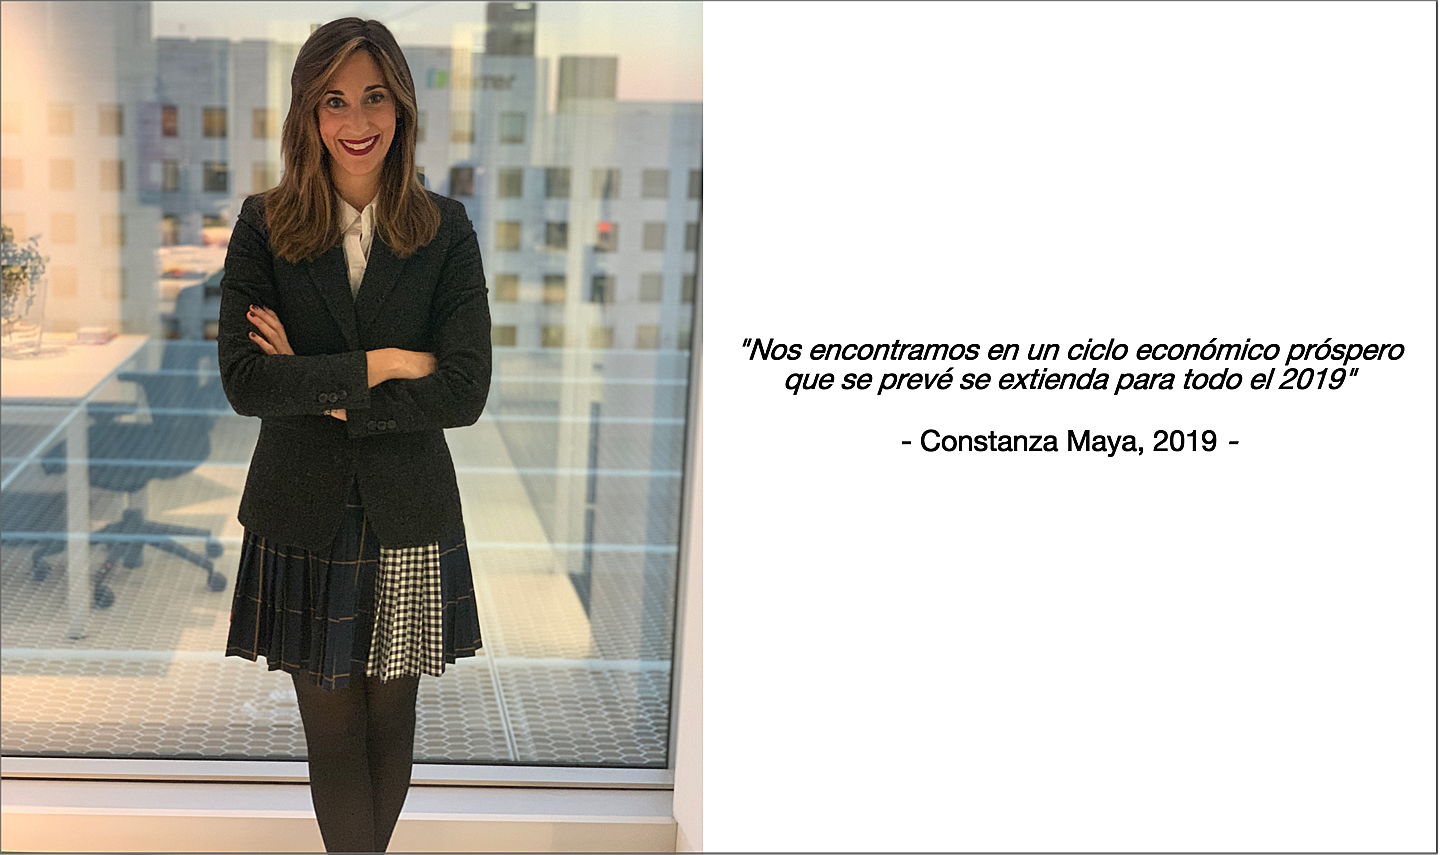  Lagos
- Constanza Maya, Head of Operations, Expansion & Support